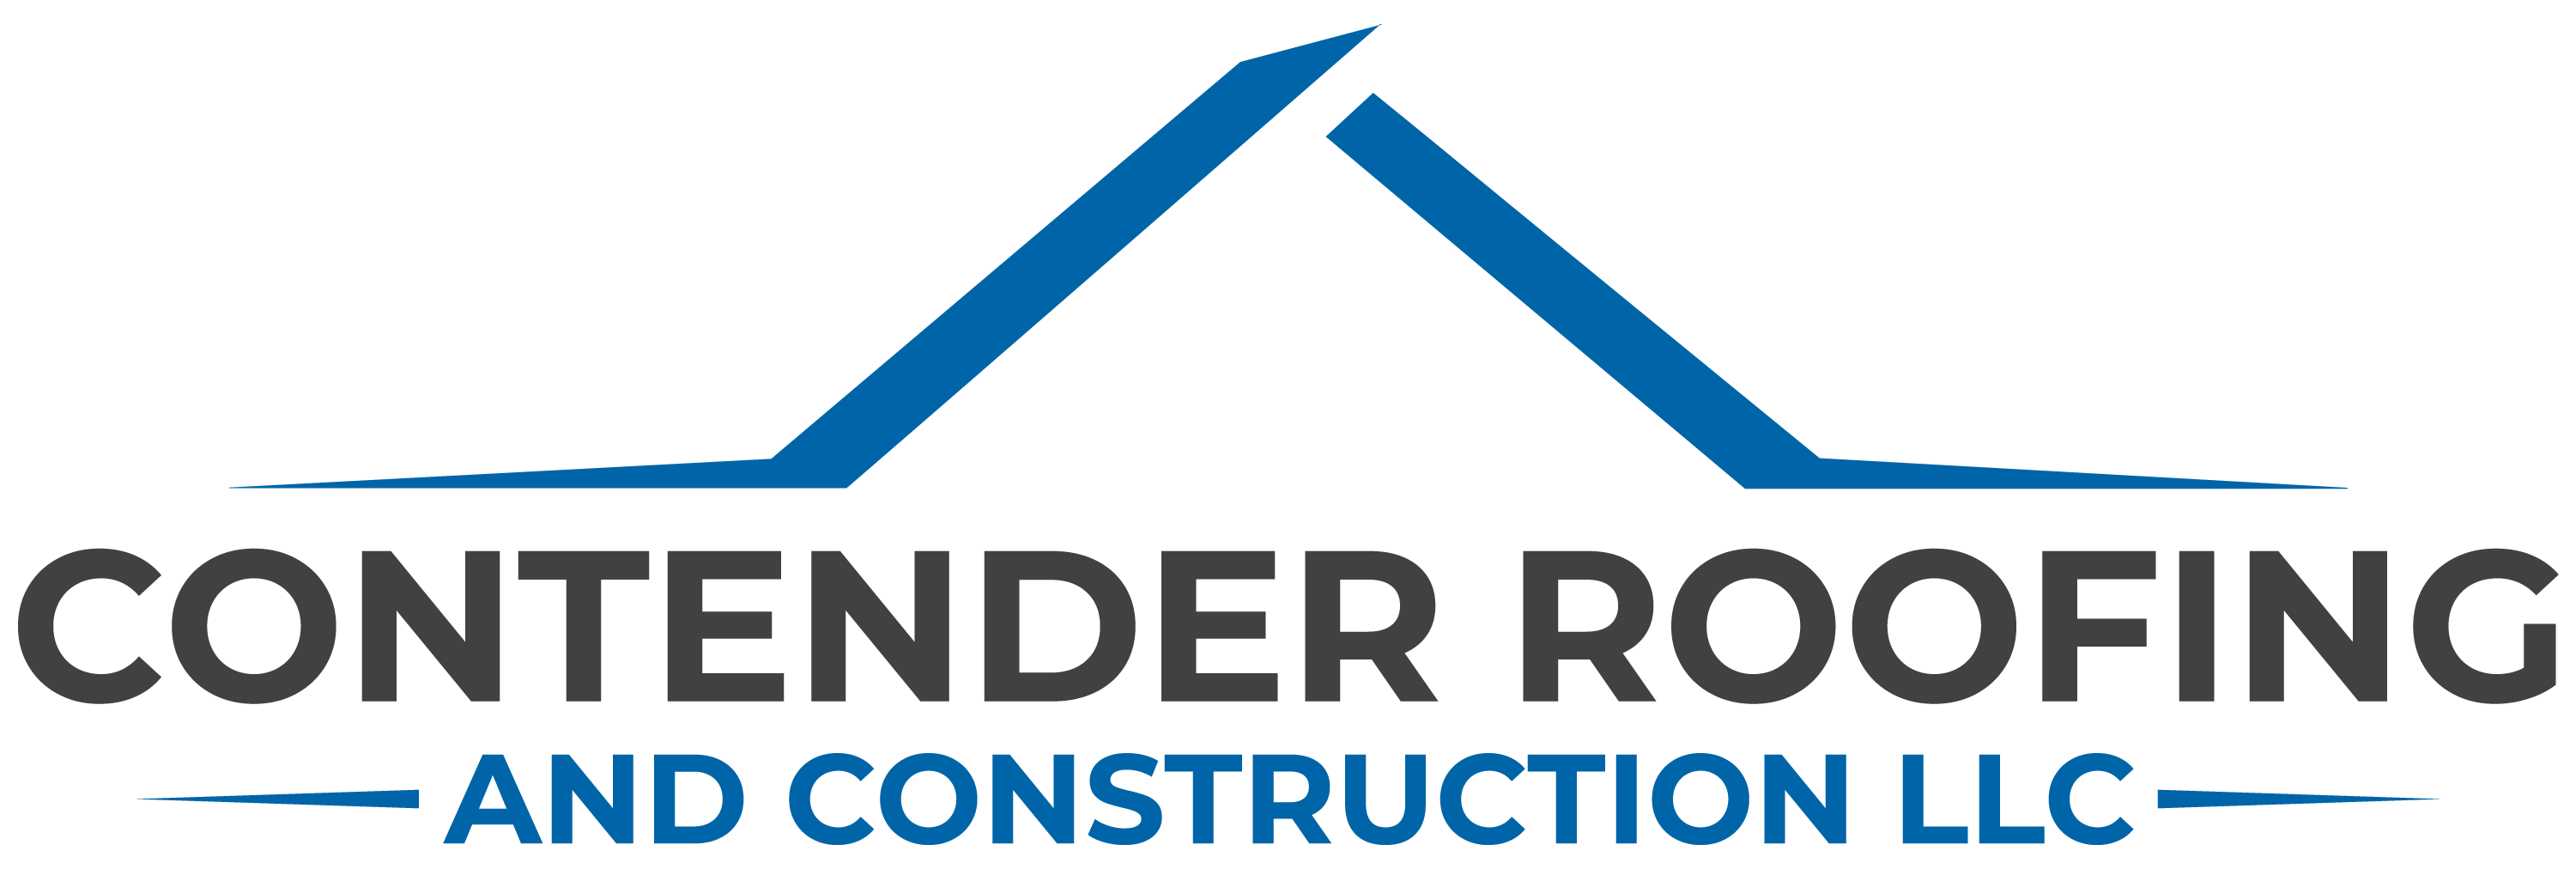 Contender Roofing